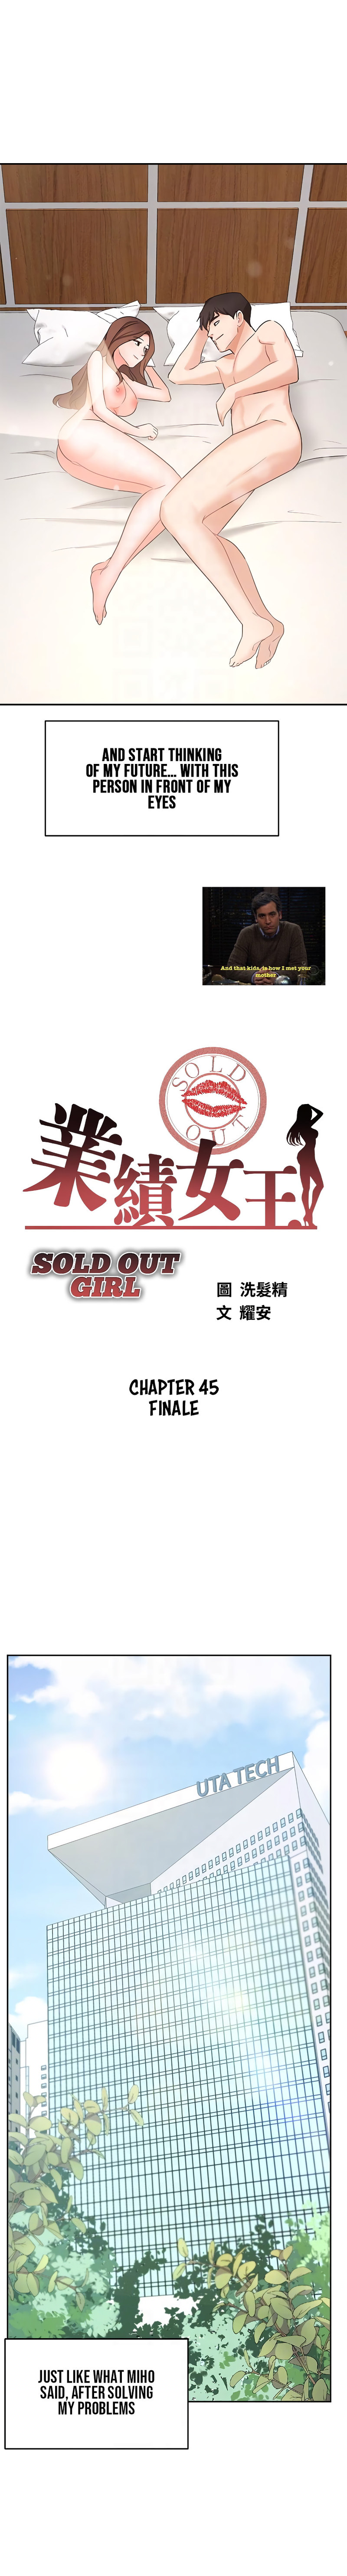 Sold Out Girl - Chapter 45 Page 4